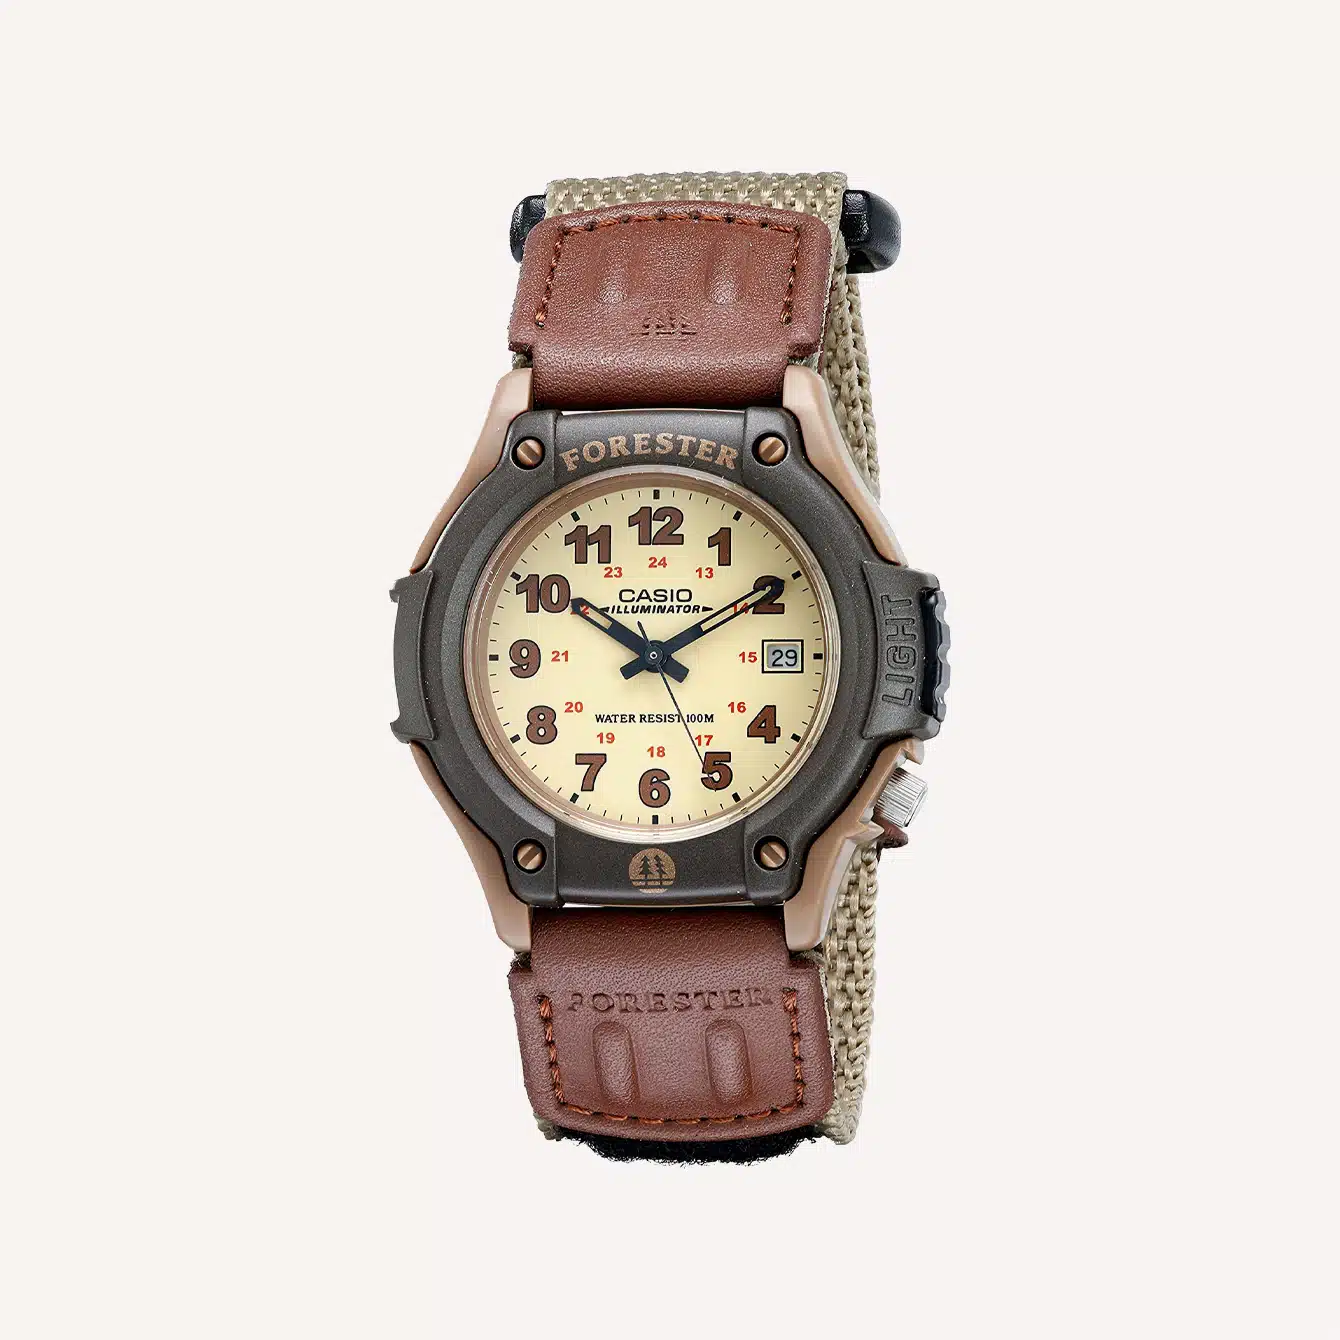 Casio Forester FT500WC